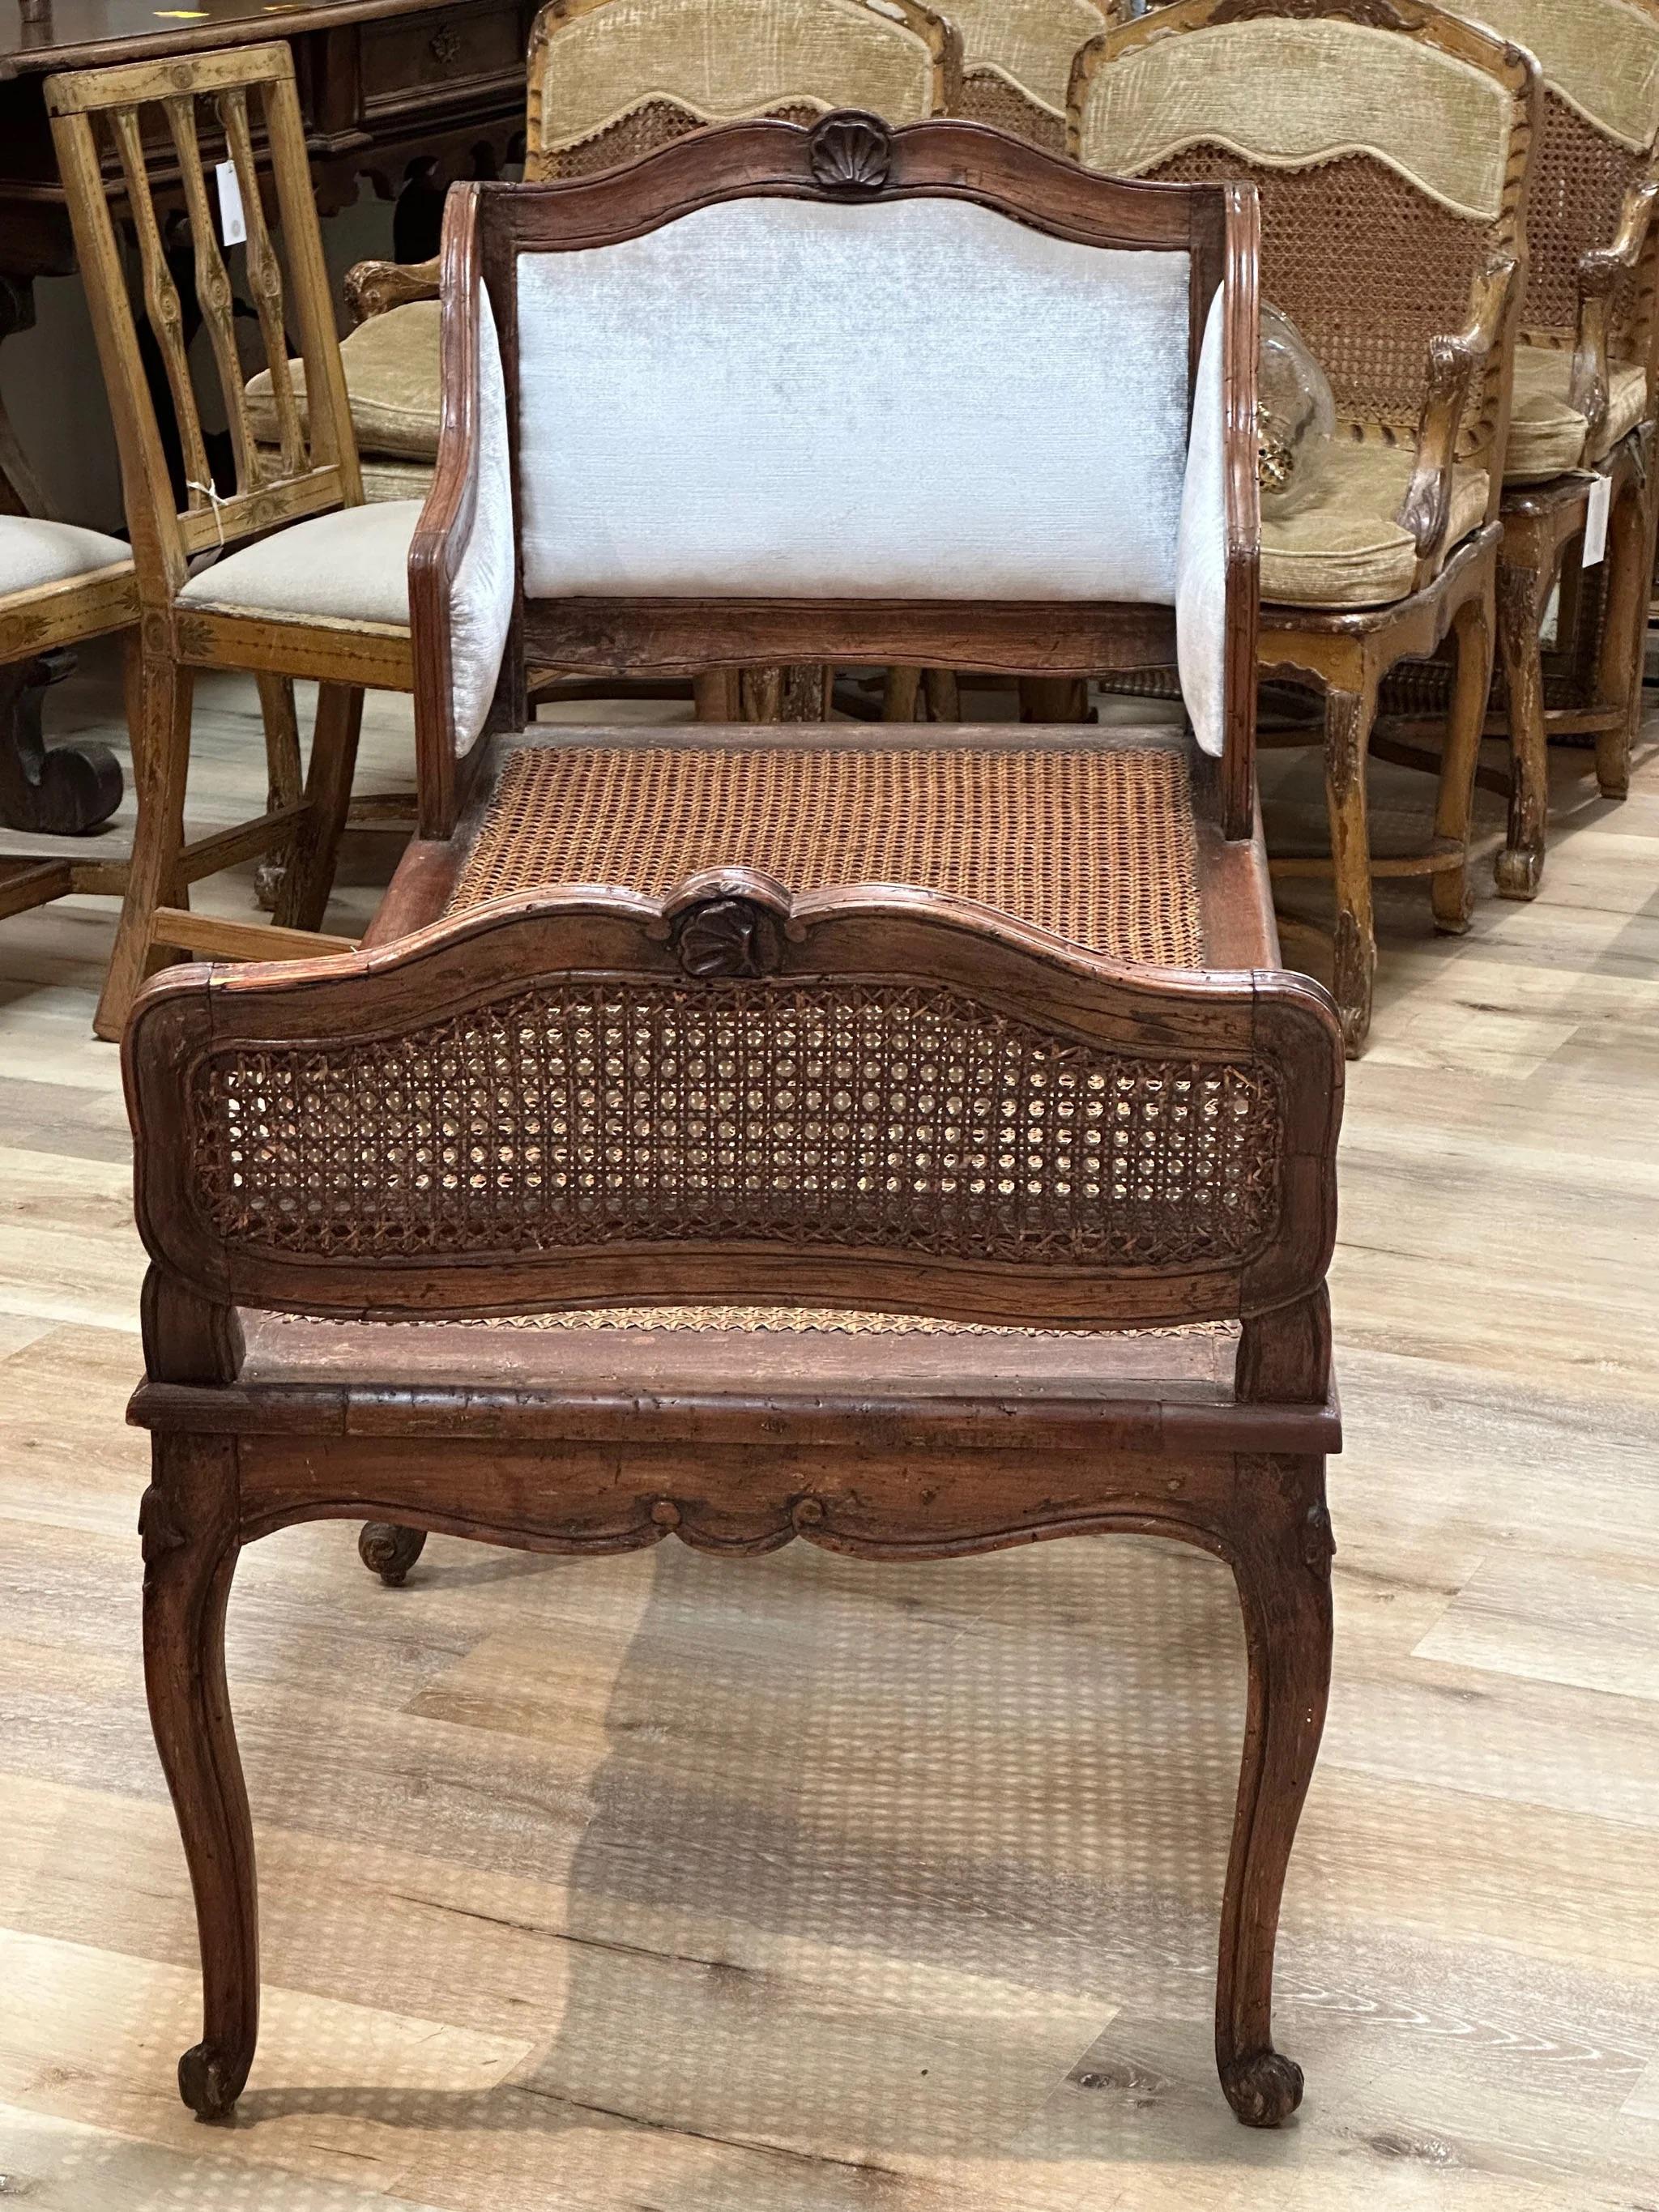 An exquisite 18th century Italian lit de repos or chaise lounge in walnut and cane. This spectacular chaise has a beautifully sculpted apron and cabriole legs. A particularly rich patina to this piece.  There is a large, comfortable cushion with the